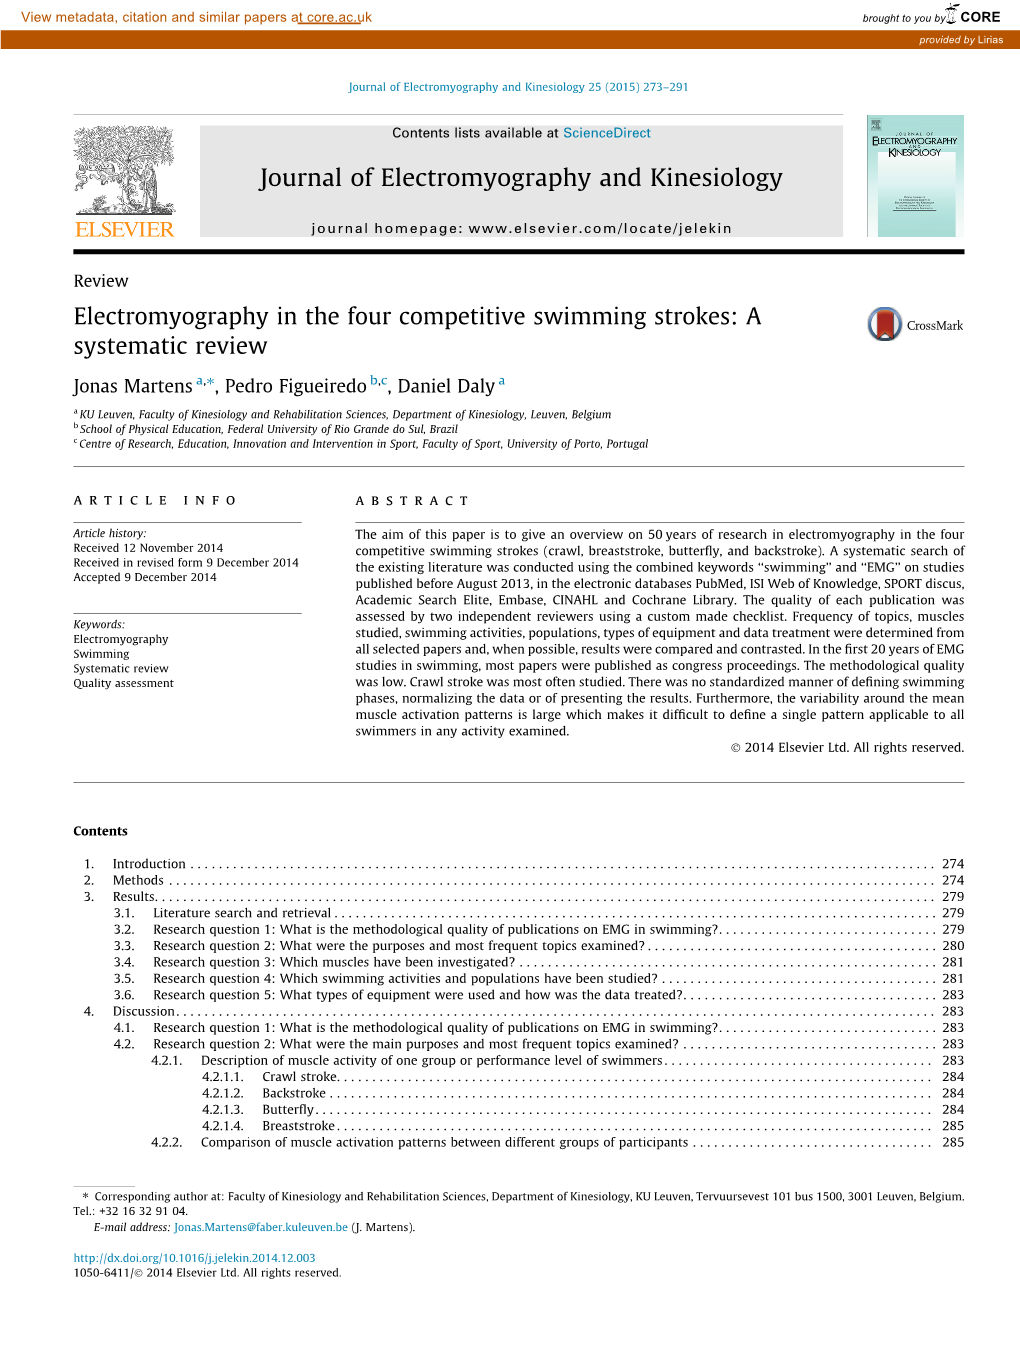 Electromyography in the Four Competitive Swimming Strokes: a Systematic Review ⇑ Jonas Martens A, , Pedro Figueiredo B,C, Daniel Daly A